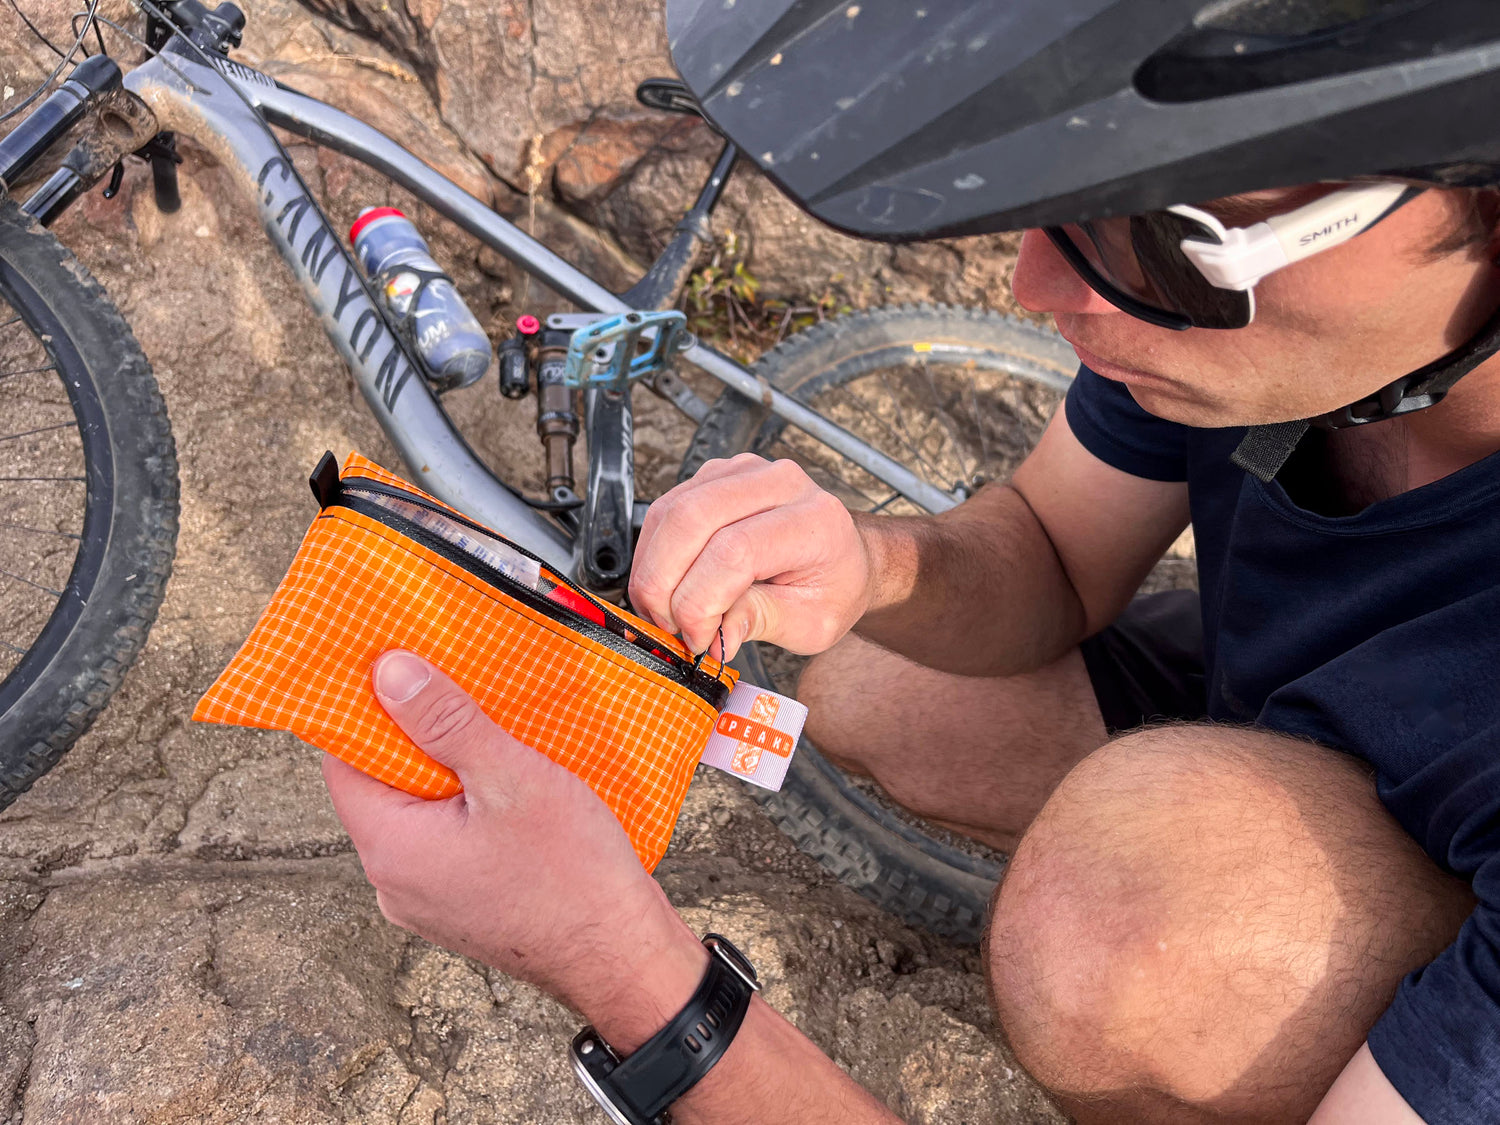 A mountain biker unzips a peak first aid kit to look inside at the contents